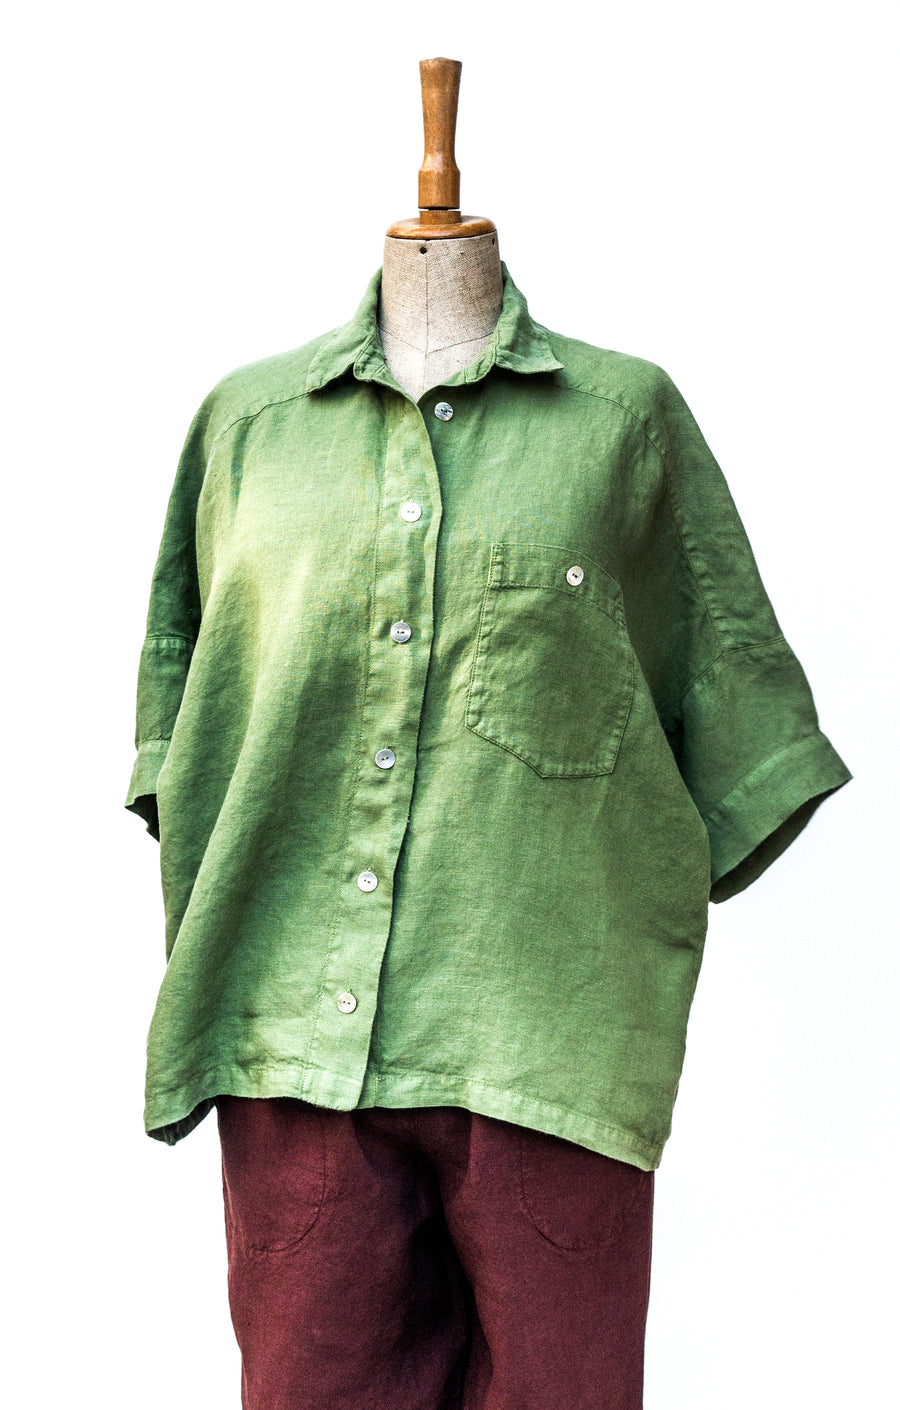 Oversized shirt in Forest Shade